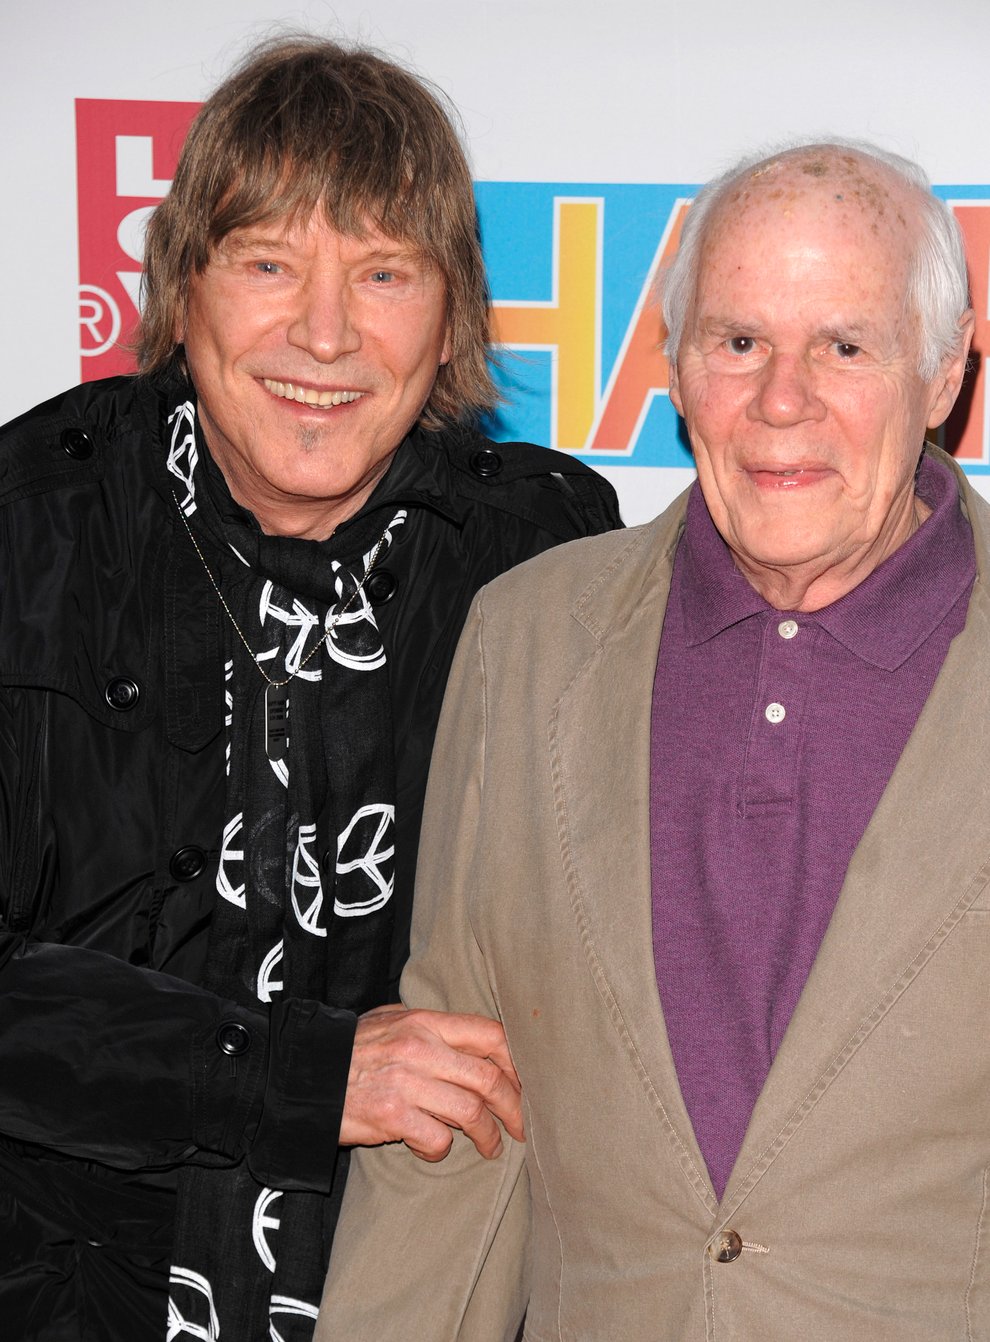 James Rado, left, and Galt MacDermot attend the opening night of the Broadway musical Hair in New York on March 31n 2009 (Peter Kramer/AP)